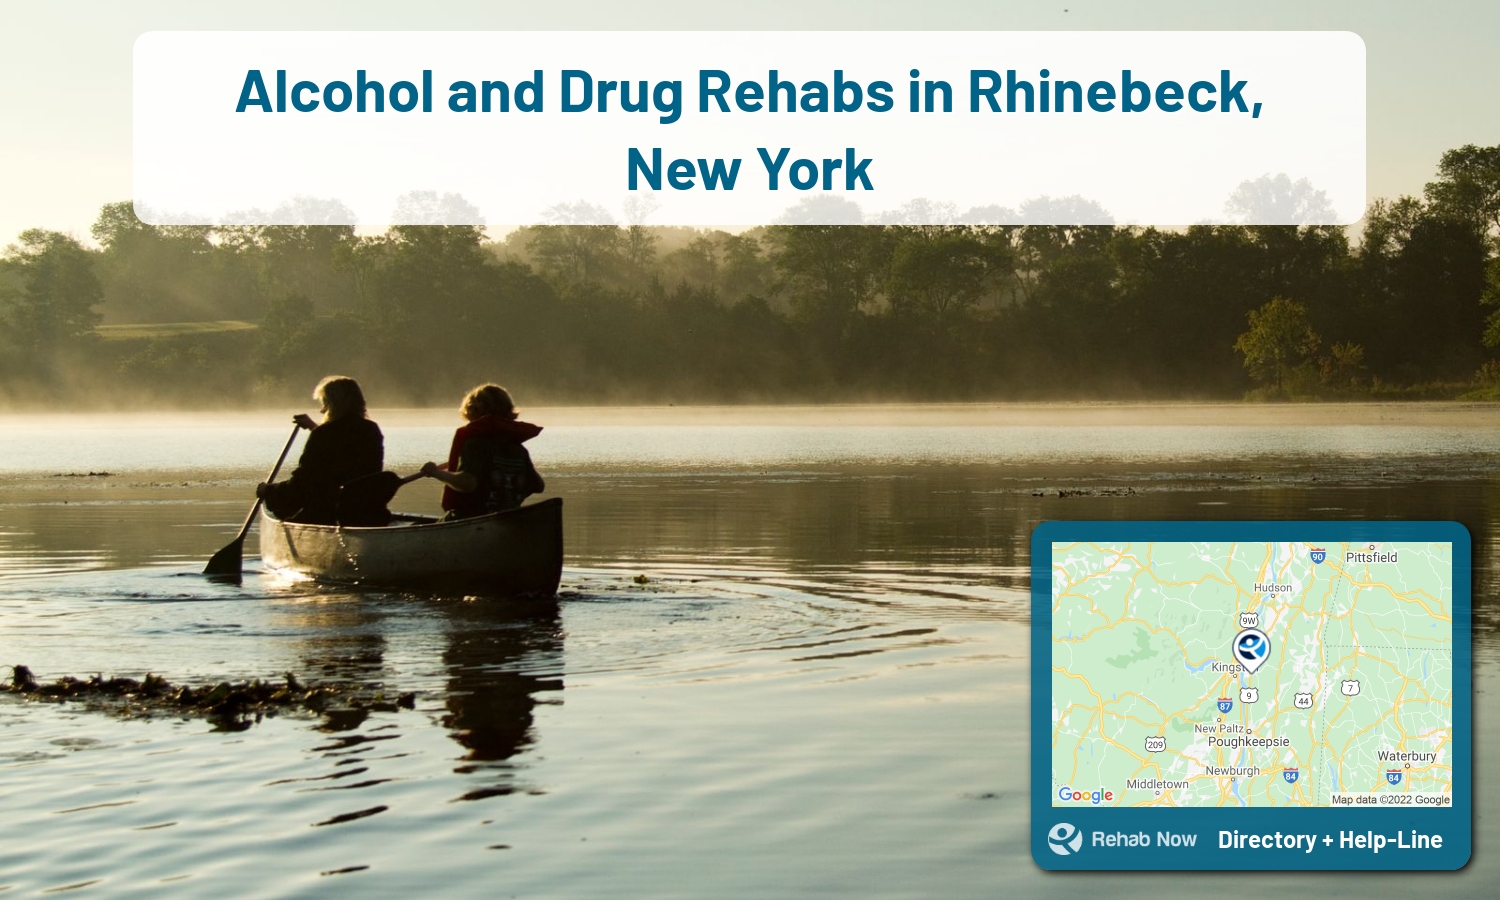 Rhinebeck, NY Treatment Centers. Find drug rehab in Rhinebeck, New York, or detox and treatment programs. Get the right help now!